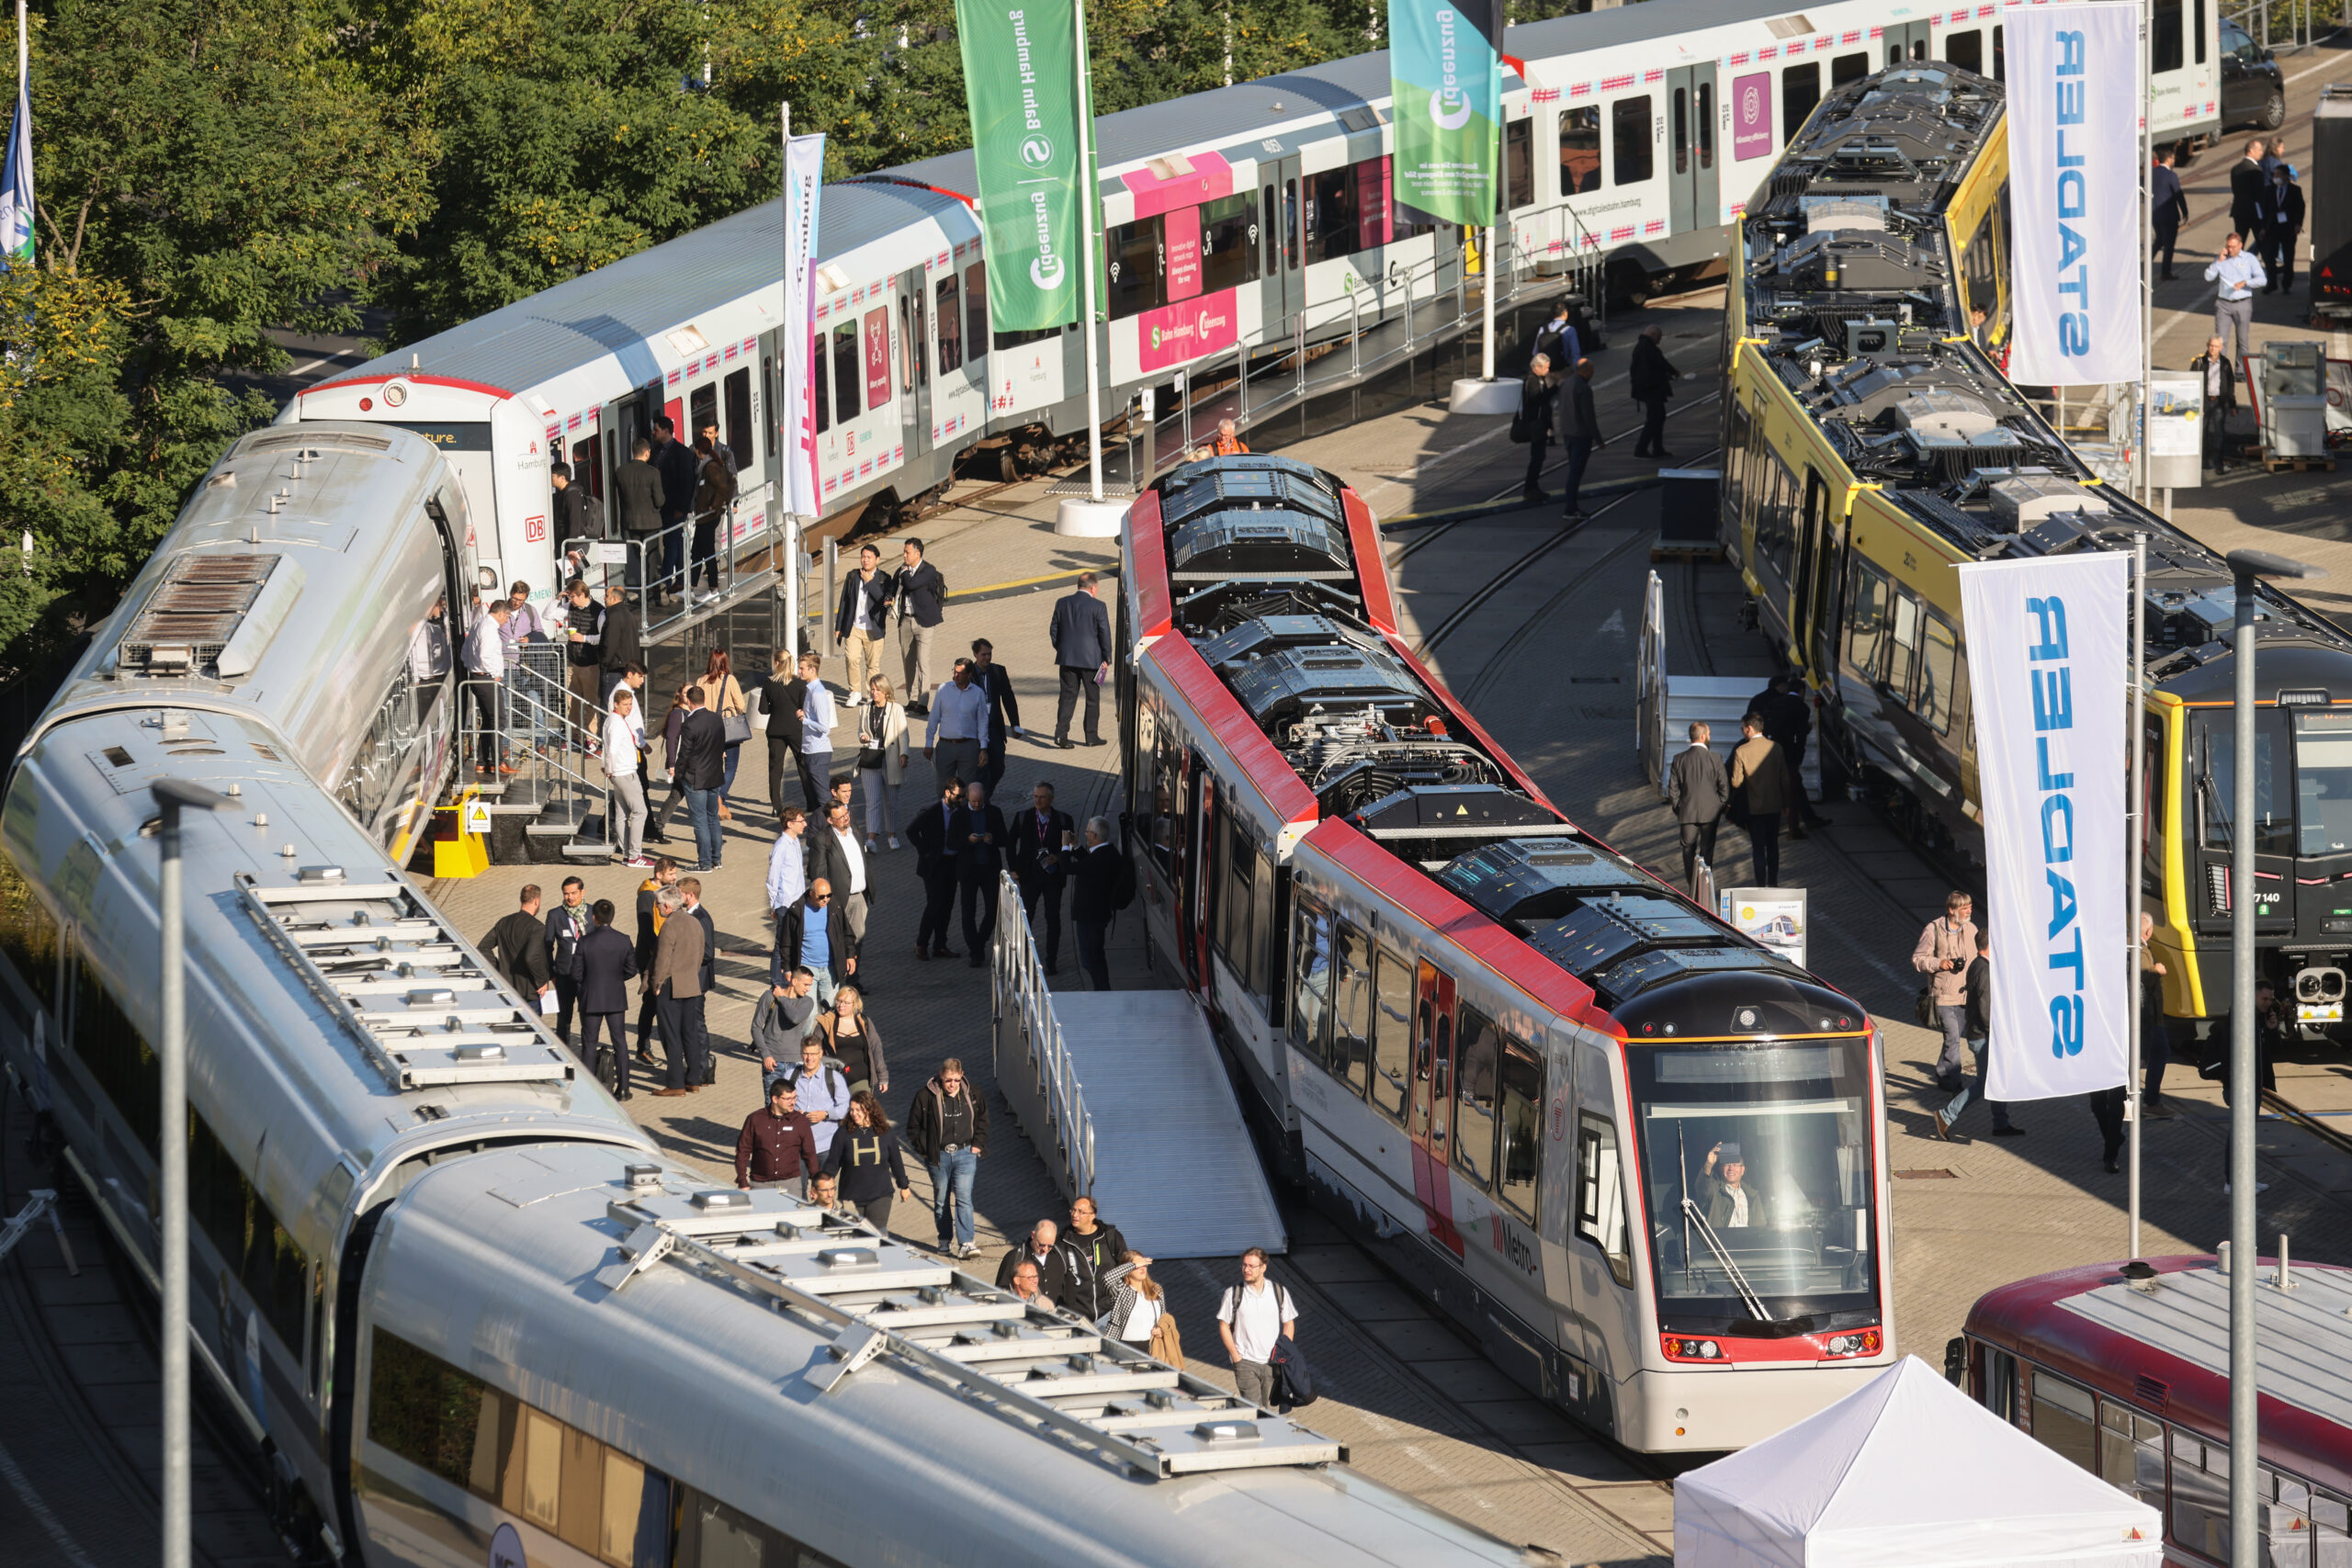 From left to right: Bombardier’s Class 474 metro train upgraded by Siemens Mobility, Stadler’s Class 398 Citylink tram-train and Stadler’s Class 777 IPEMU hybrid urban train at Innotrans 2022